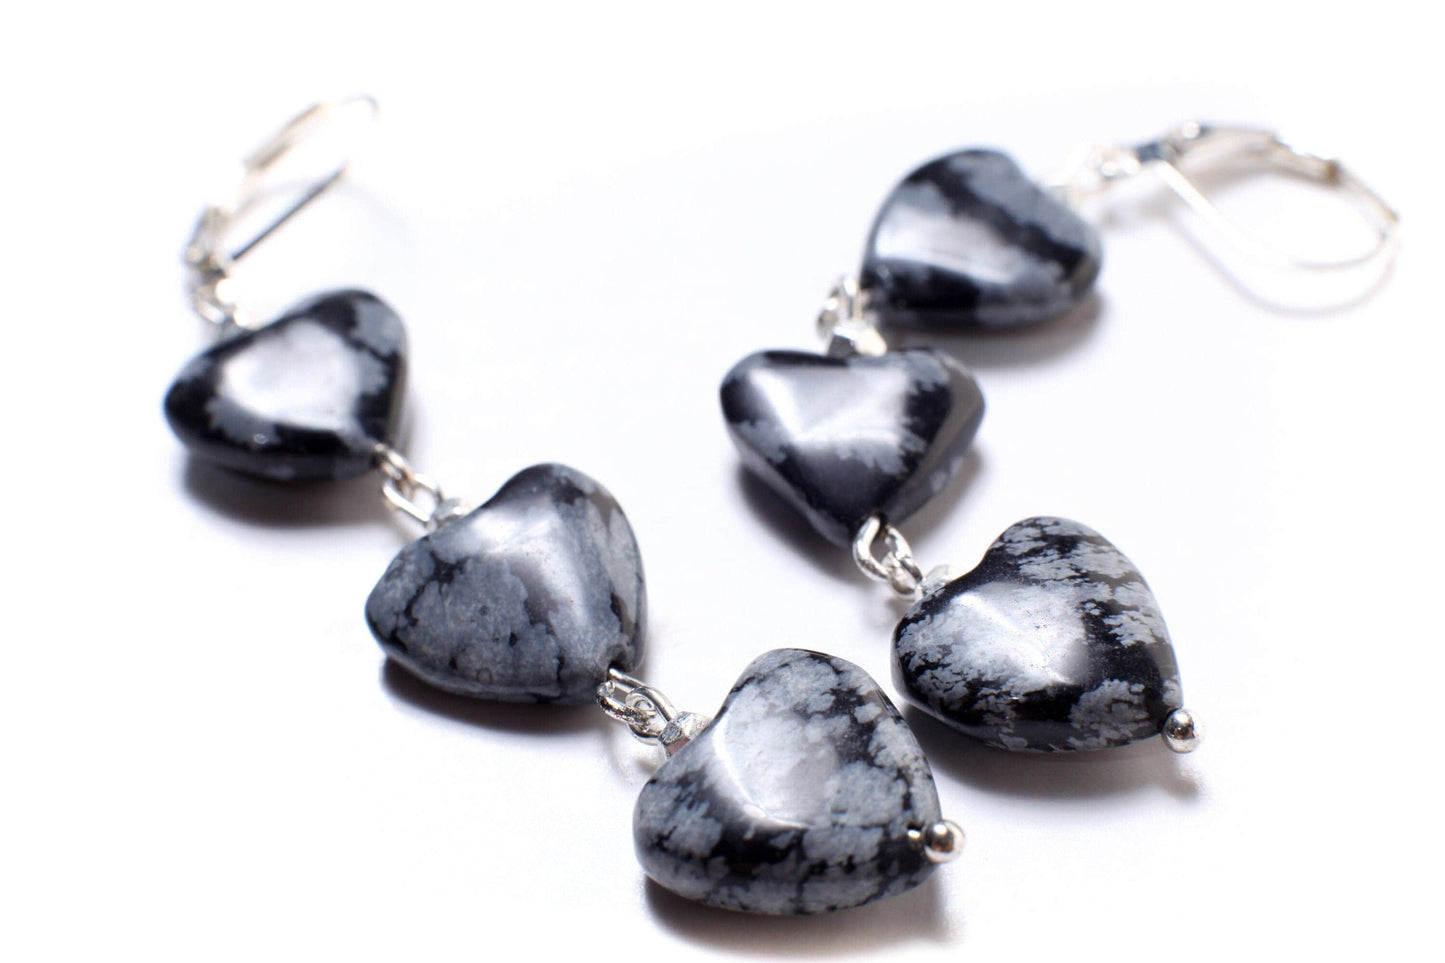 Snow Flake Obsidian 12mm Heart, Dangling 3 Hearts, Silver Leverback Earrings, Vintage Natural Gemstone Handmade Gift For Her